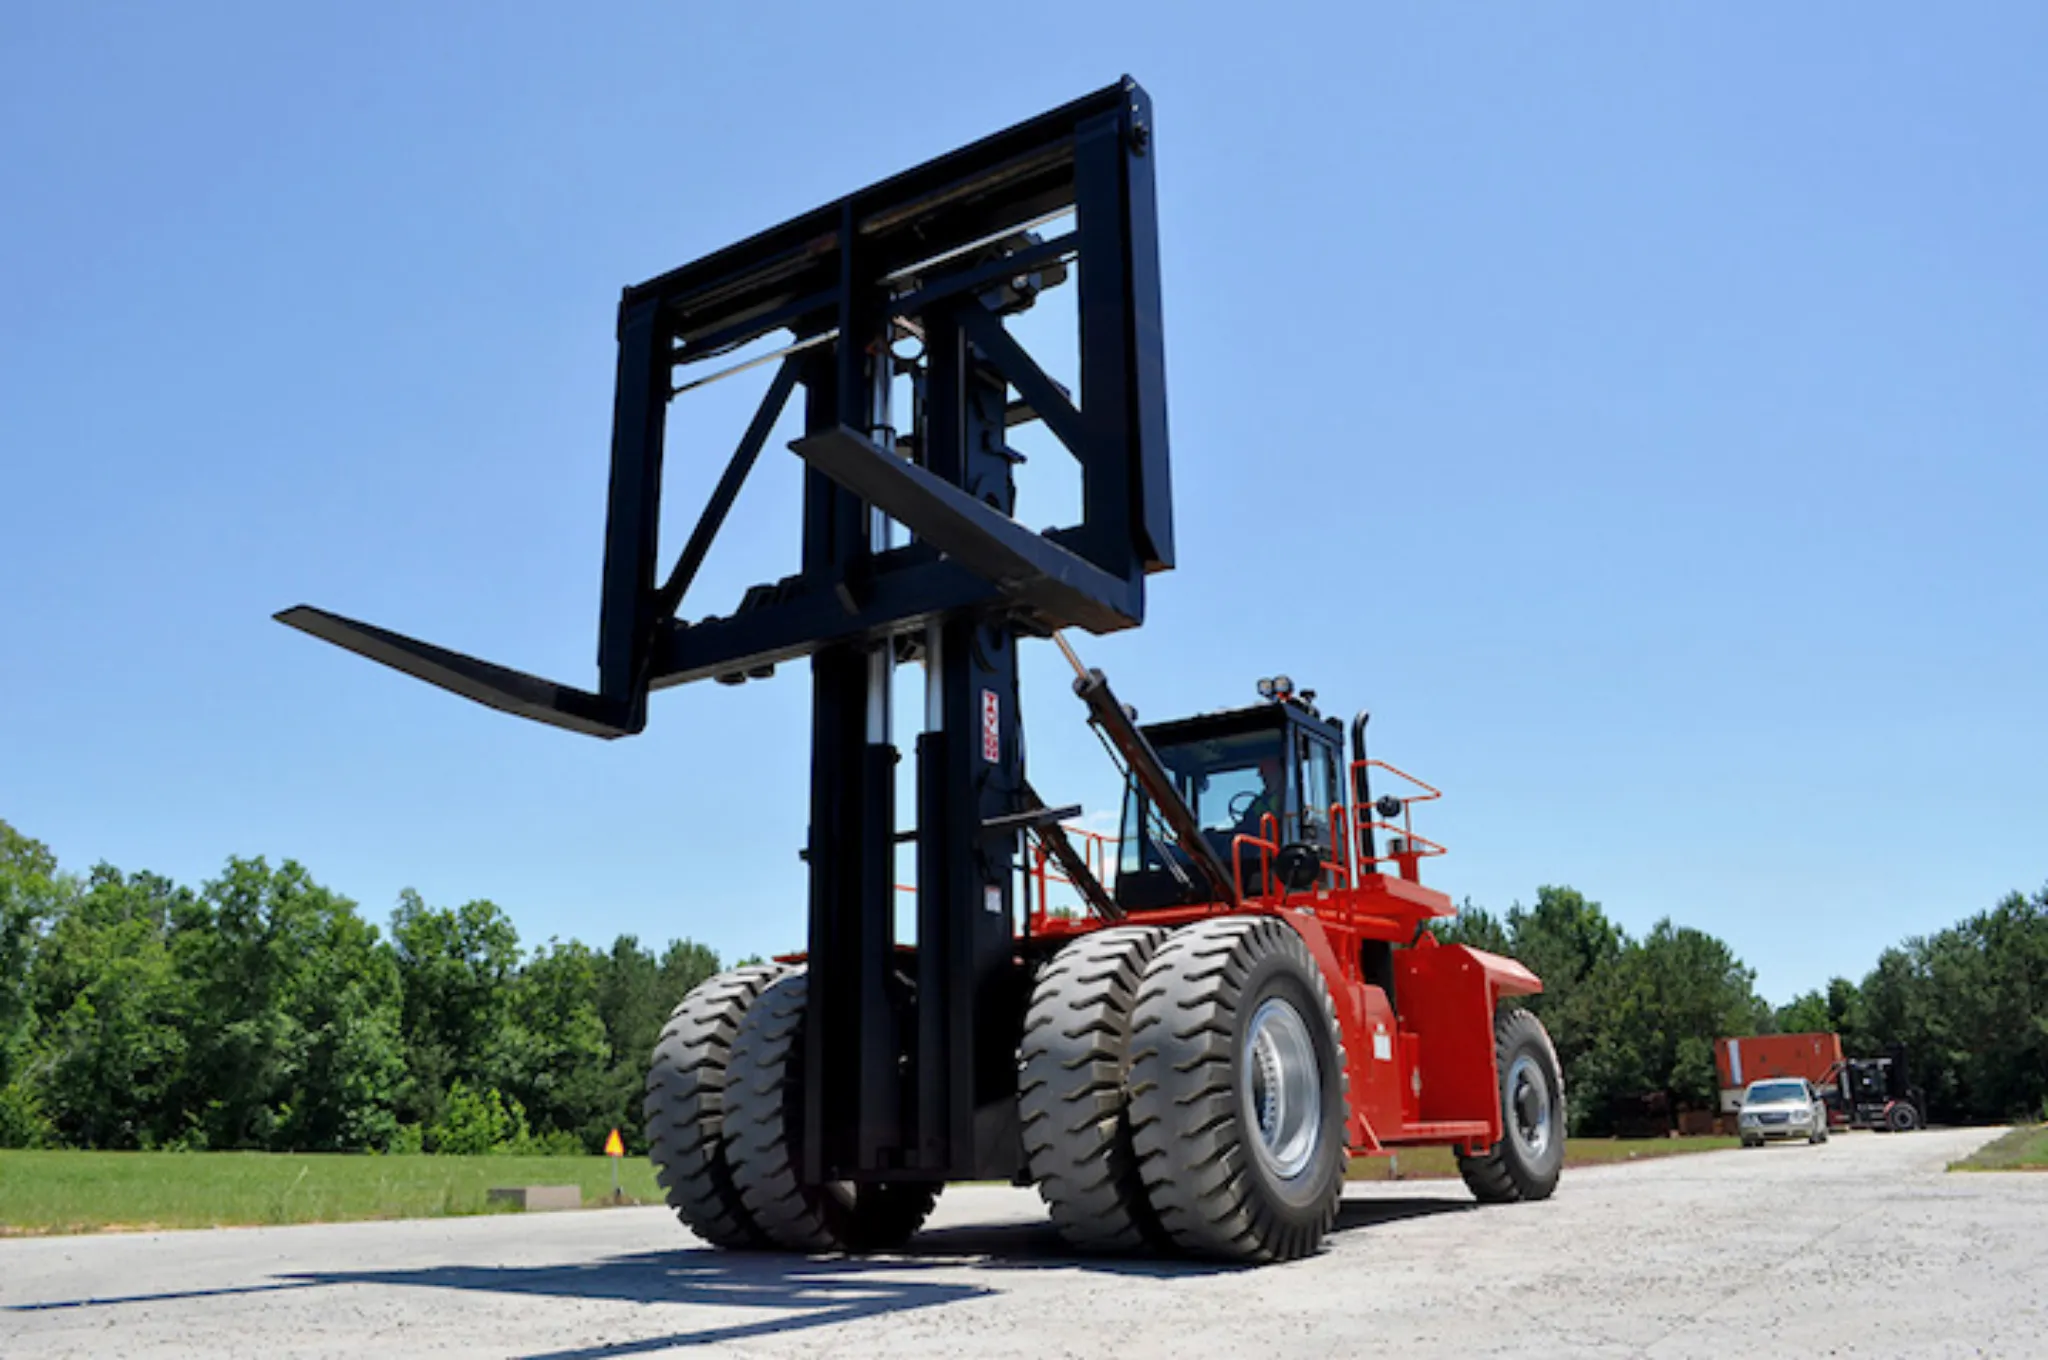 Taylor X-1200 High Capacity Forklift